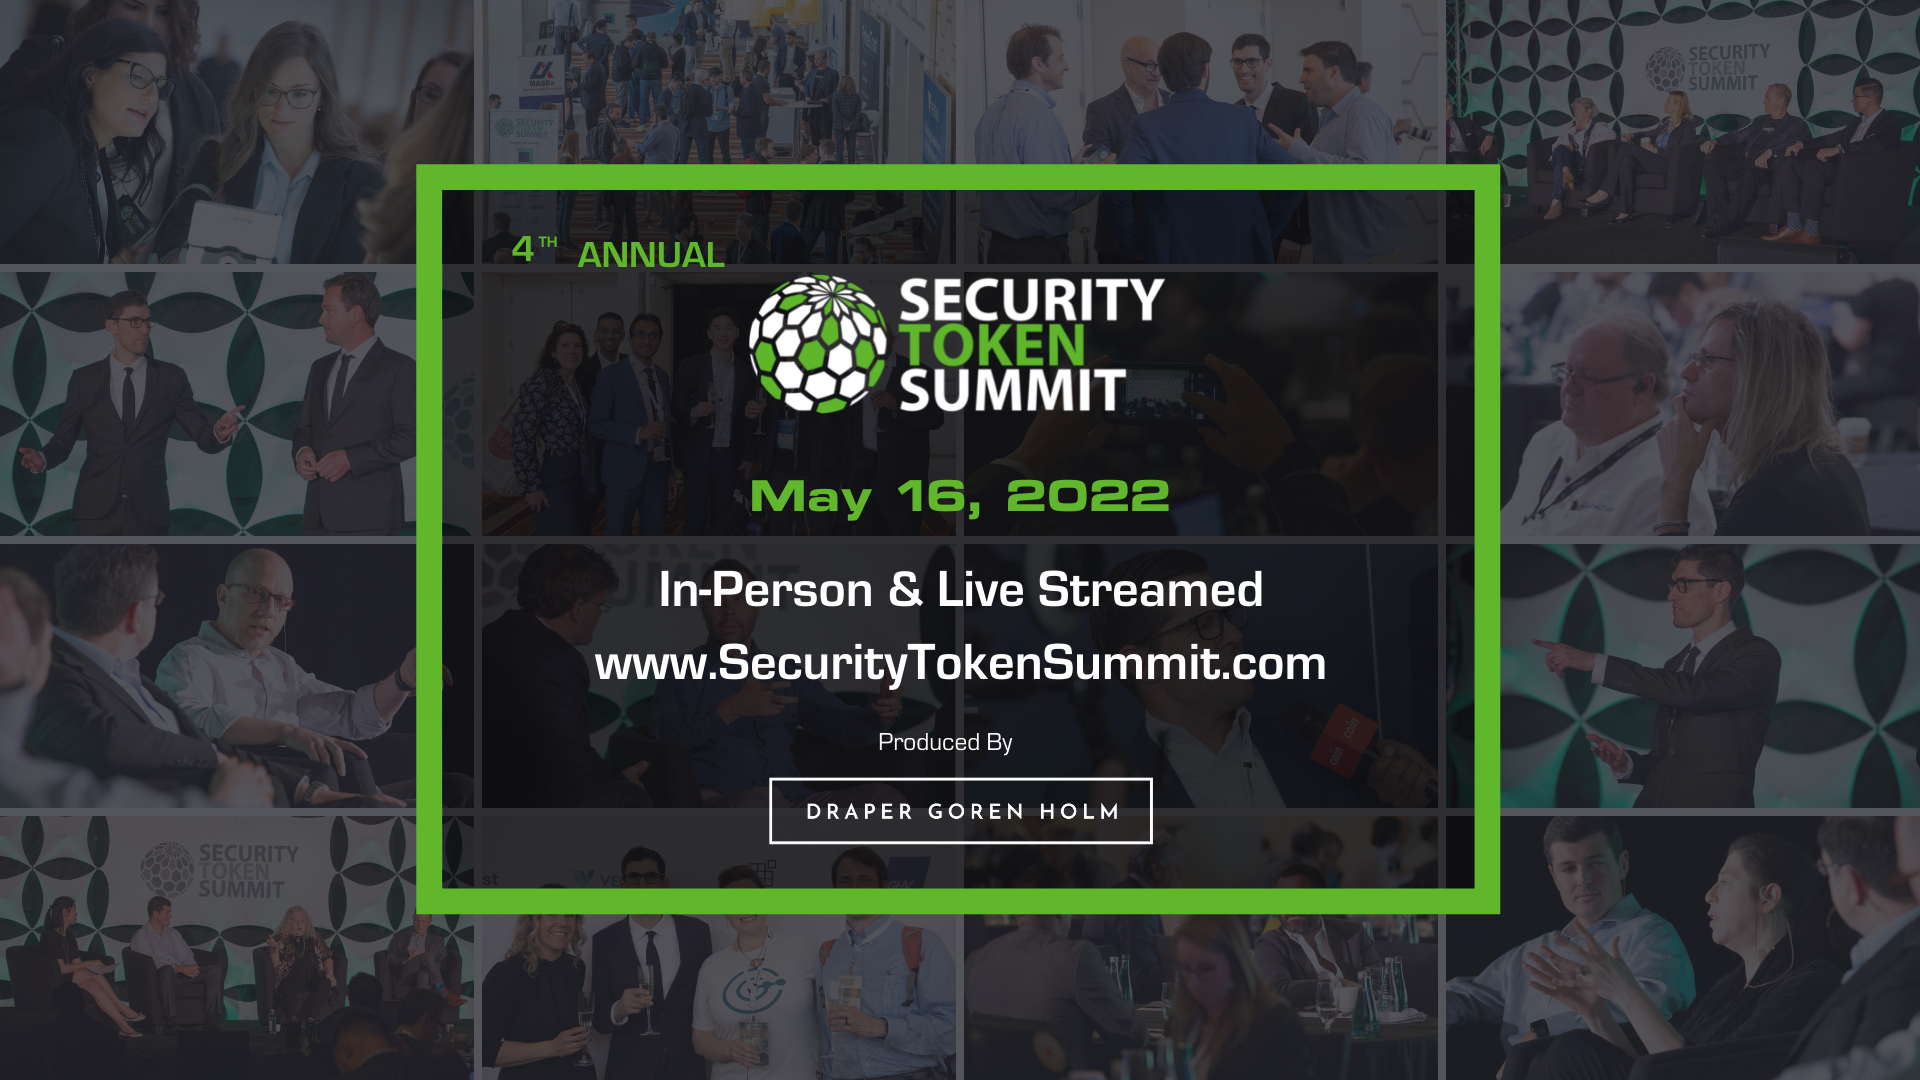 Draper Goren Holm Announces First Wave of Speakers for 4th Annual Security Token Summit in New York